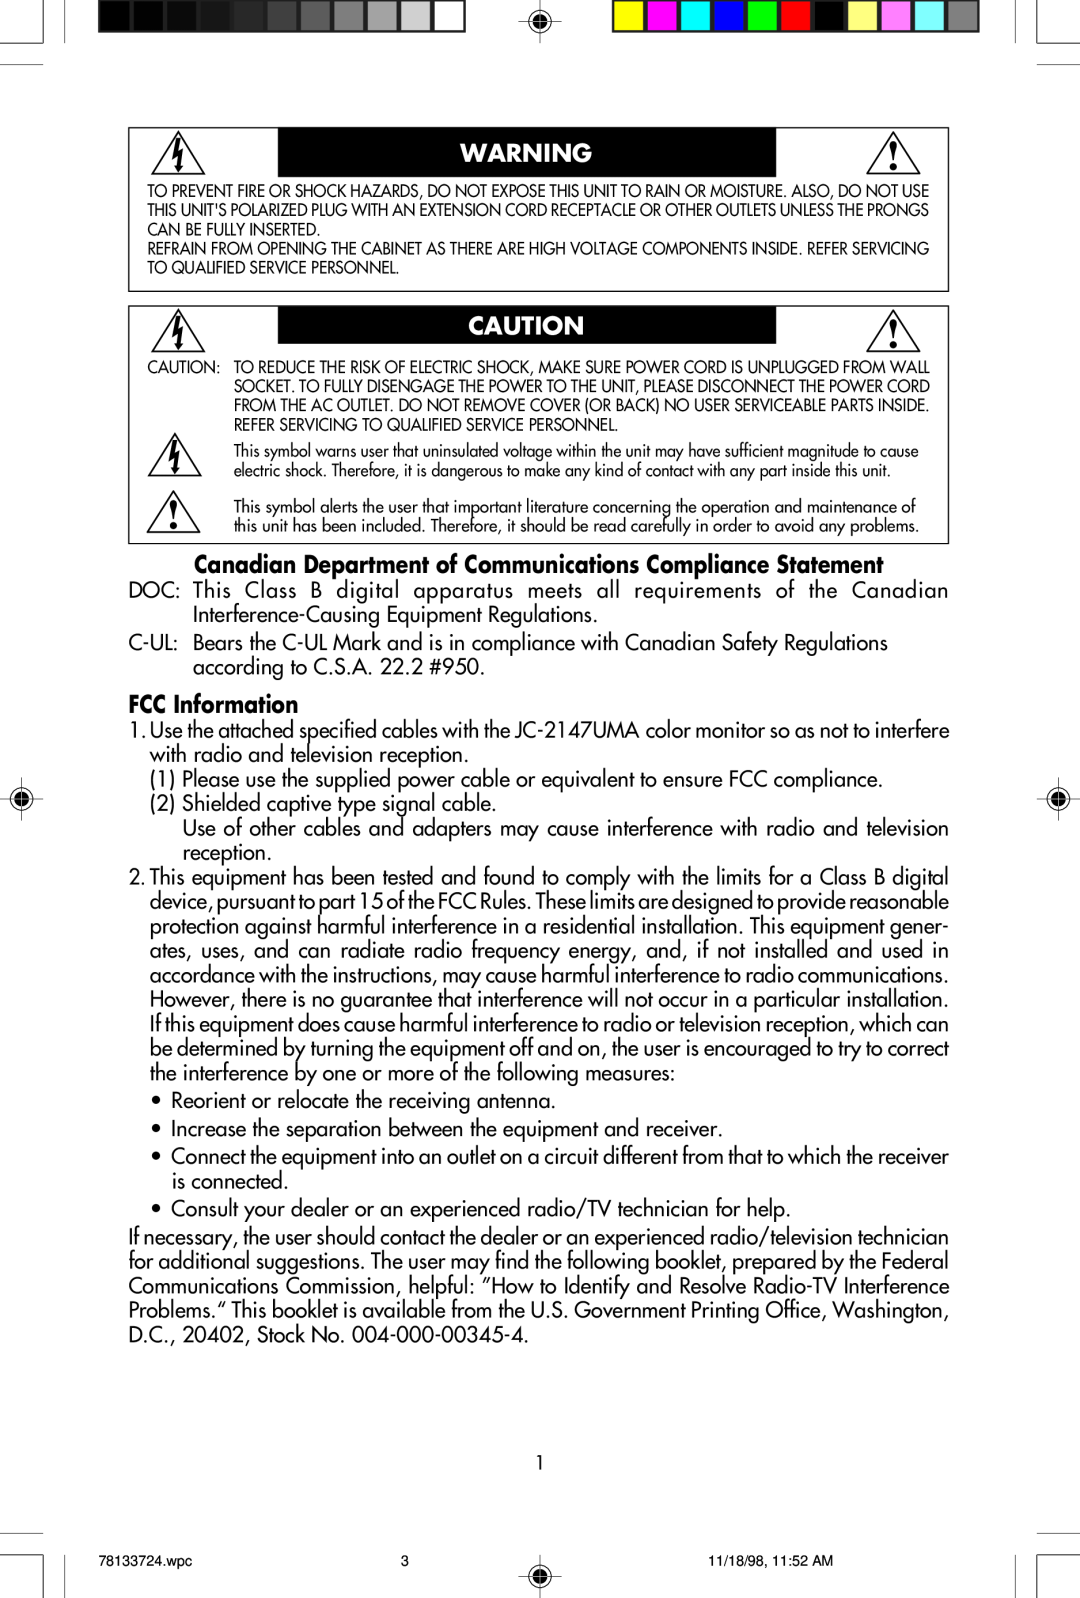 NEC E1100+ user manual Canadian Department of Communications Compliance Statement, FCC Information 